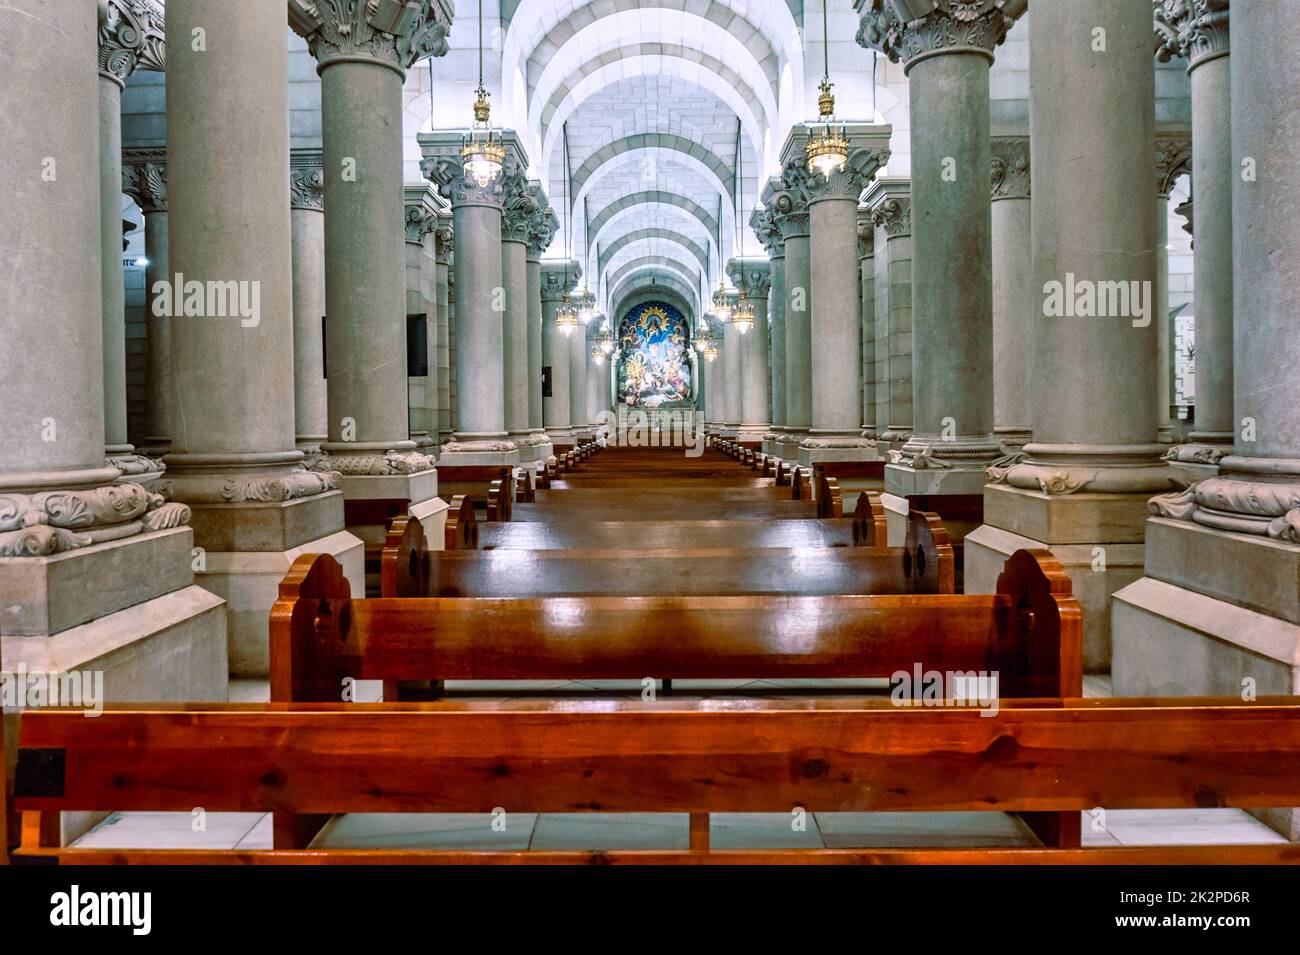 Crypt of the Almudena Cathedral, Madrid, Spain, 2022. Alamy Exclusive Stock Photo